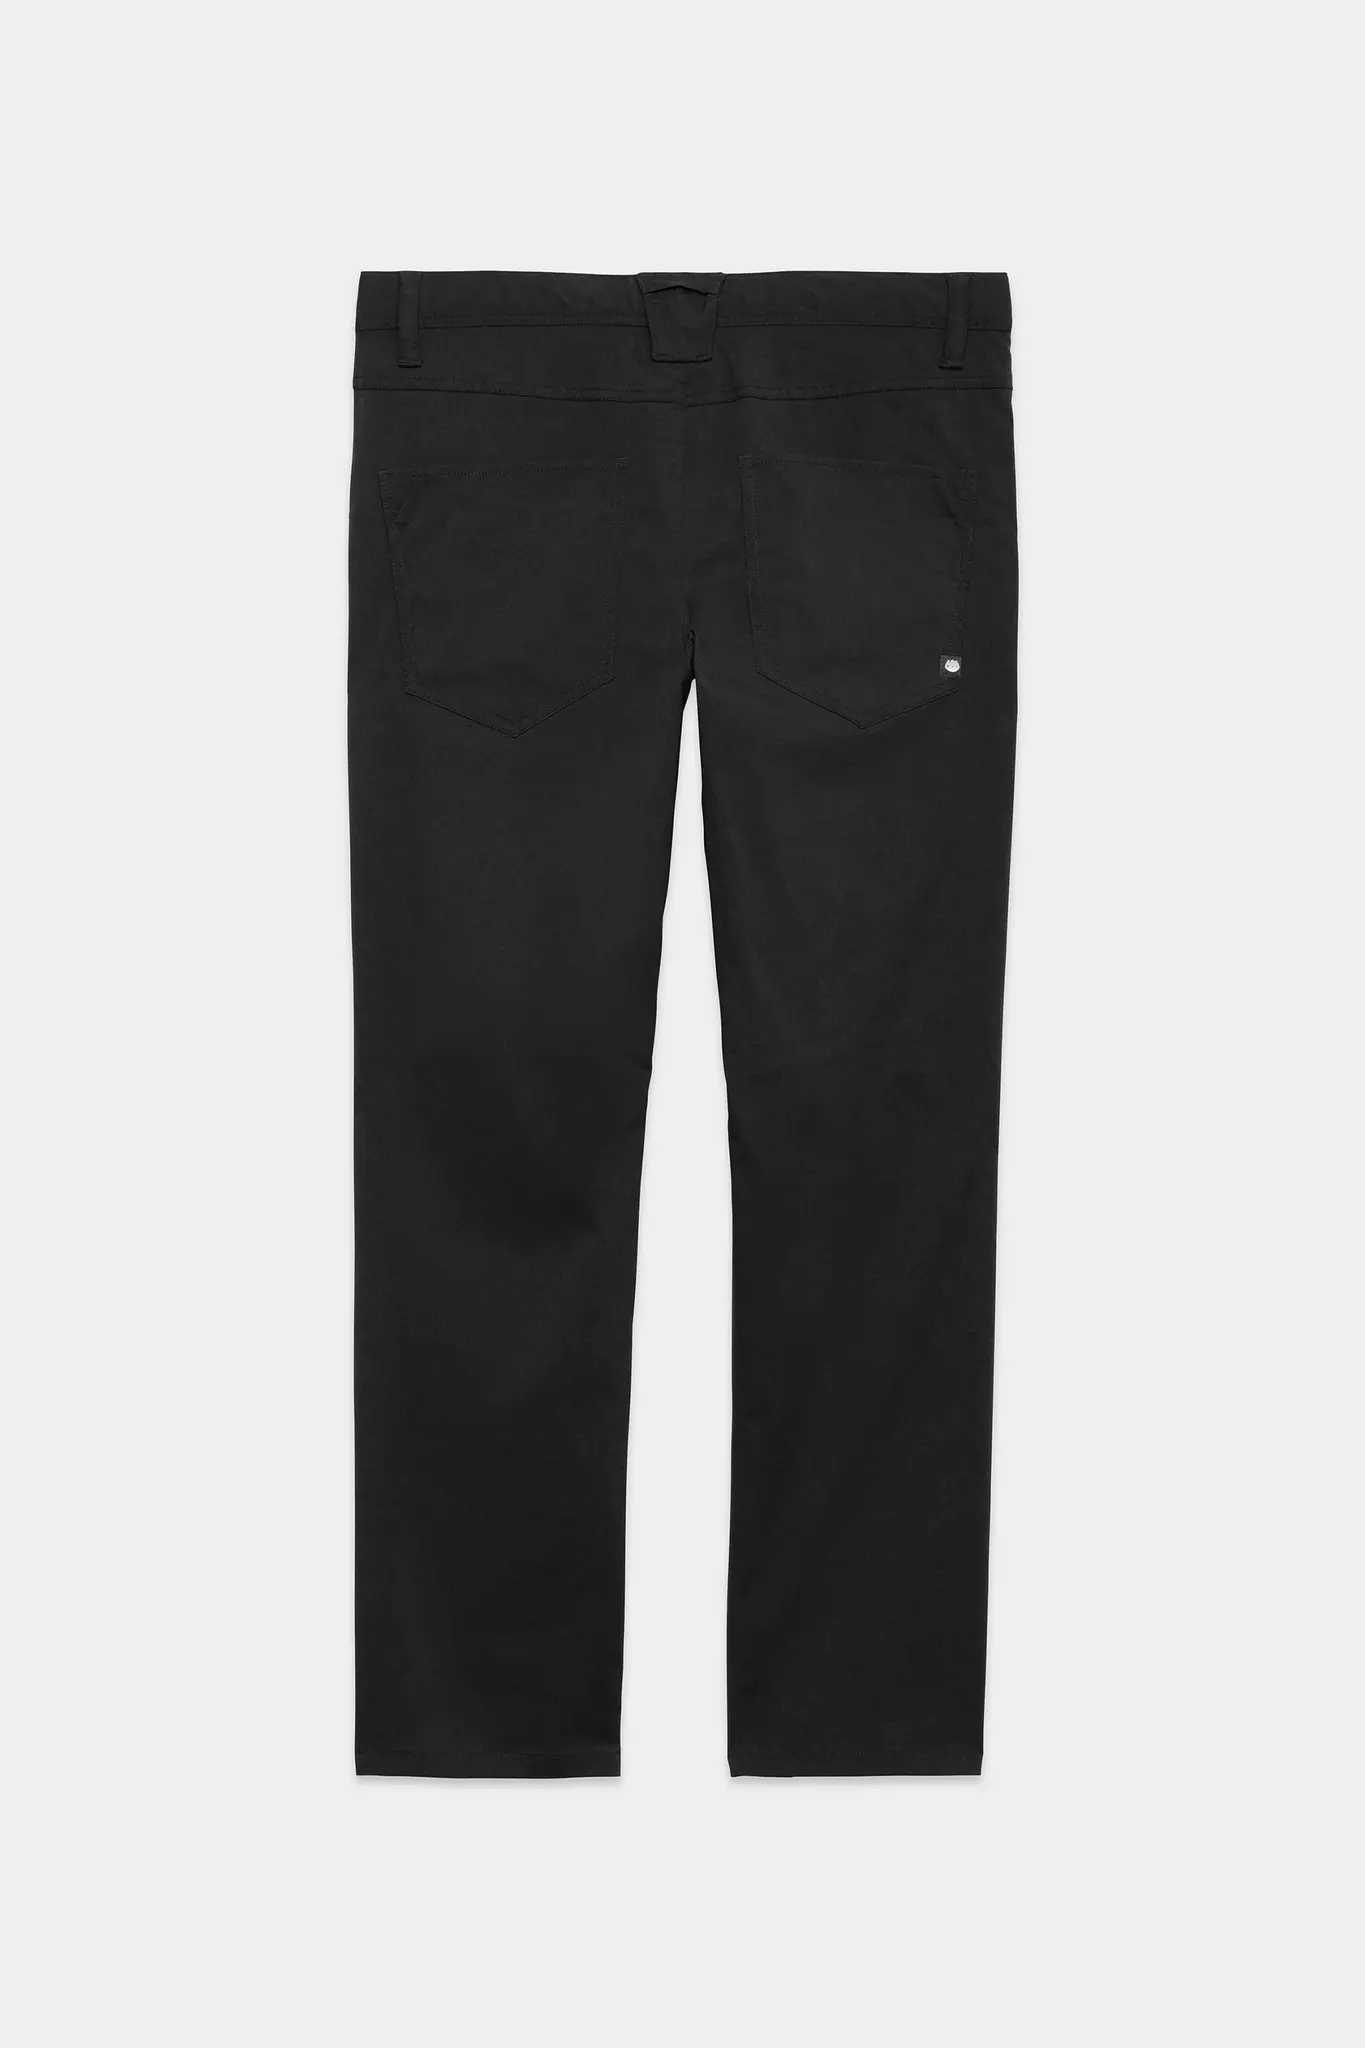 686 Men's Everywhere Double Knit Pant - Performance Fabric with Technical  Details - 9 Pocket Design - Rosette, Medium, Pants -  Canada